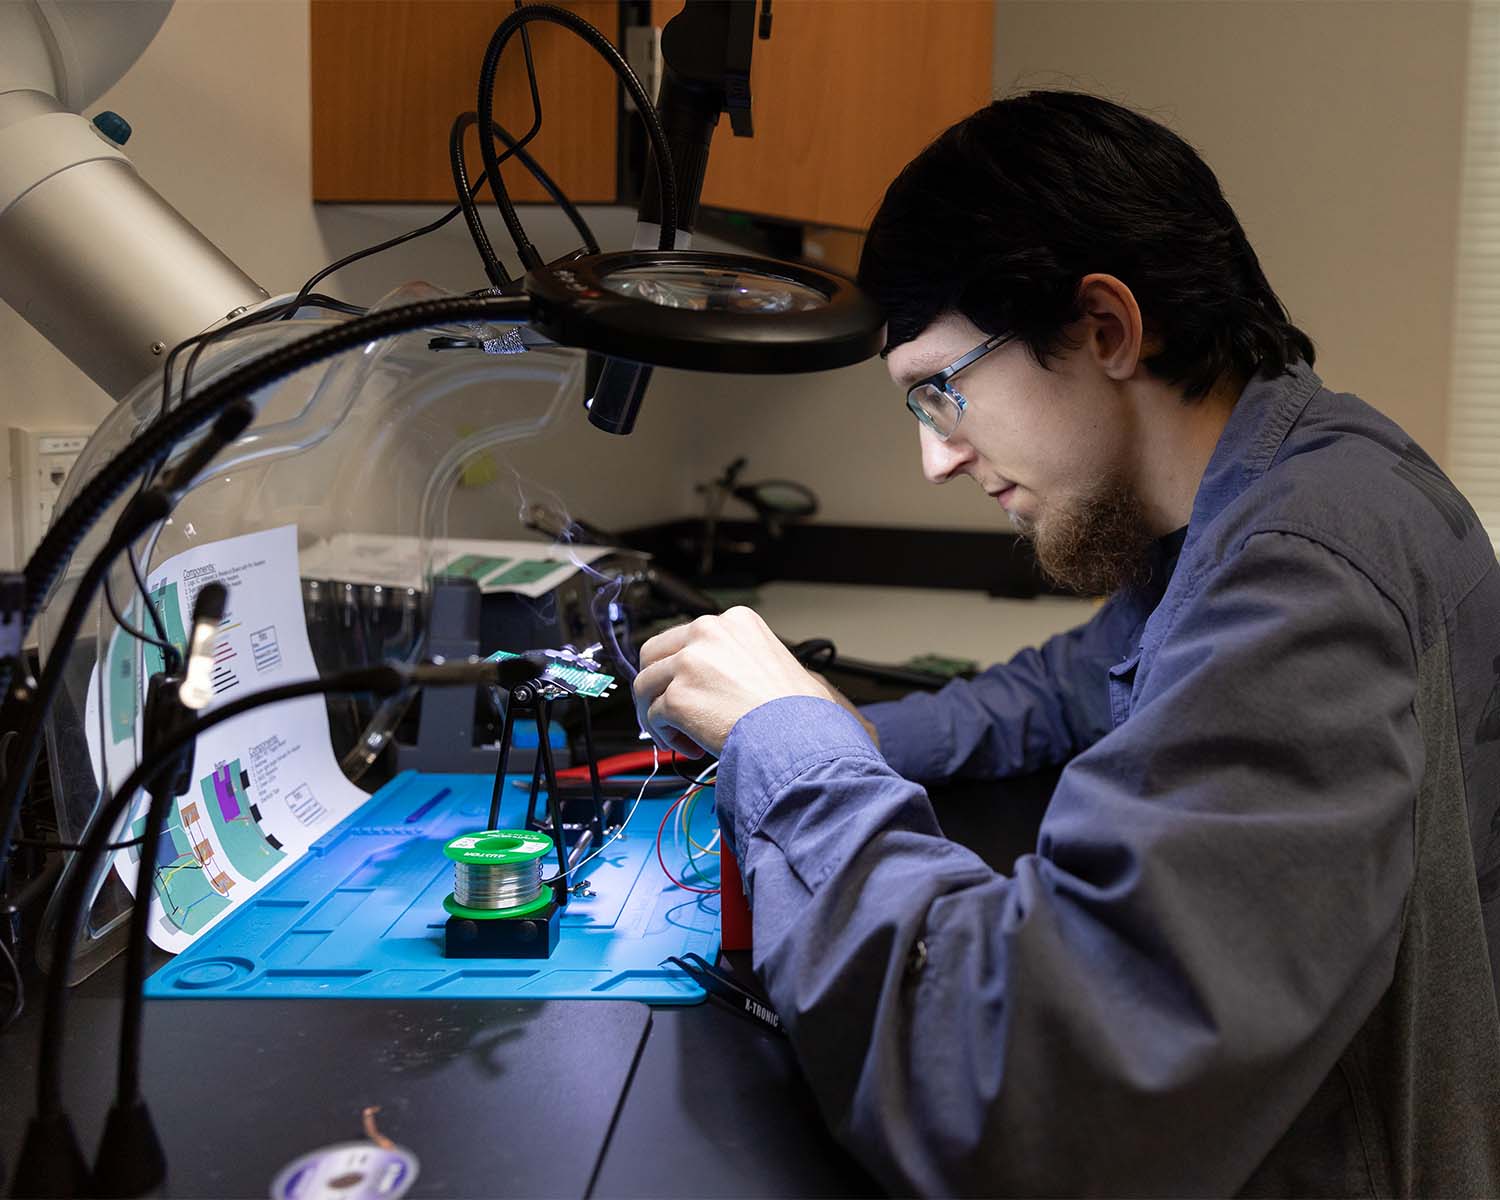 A software engineering student works on connecting circuits